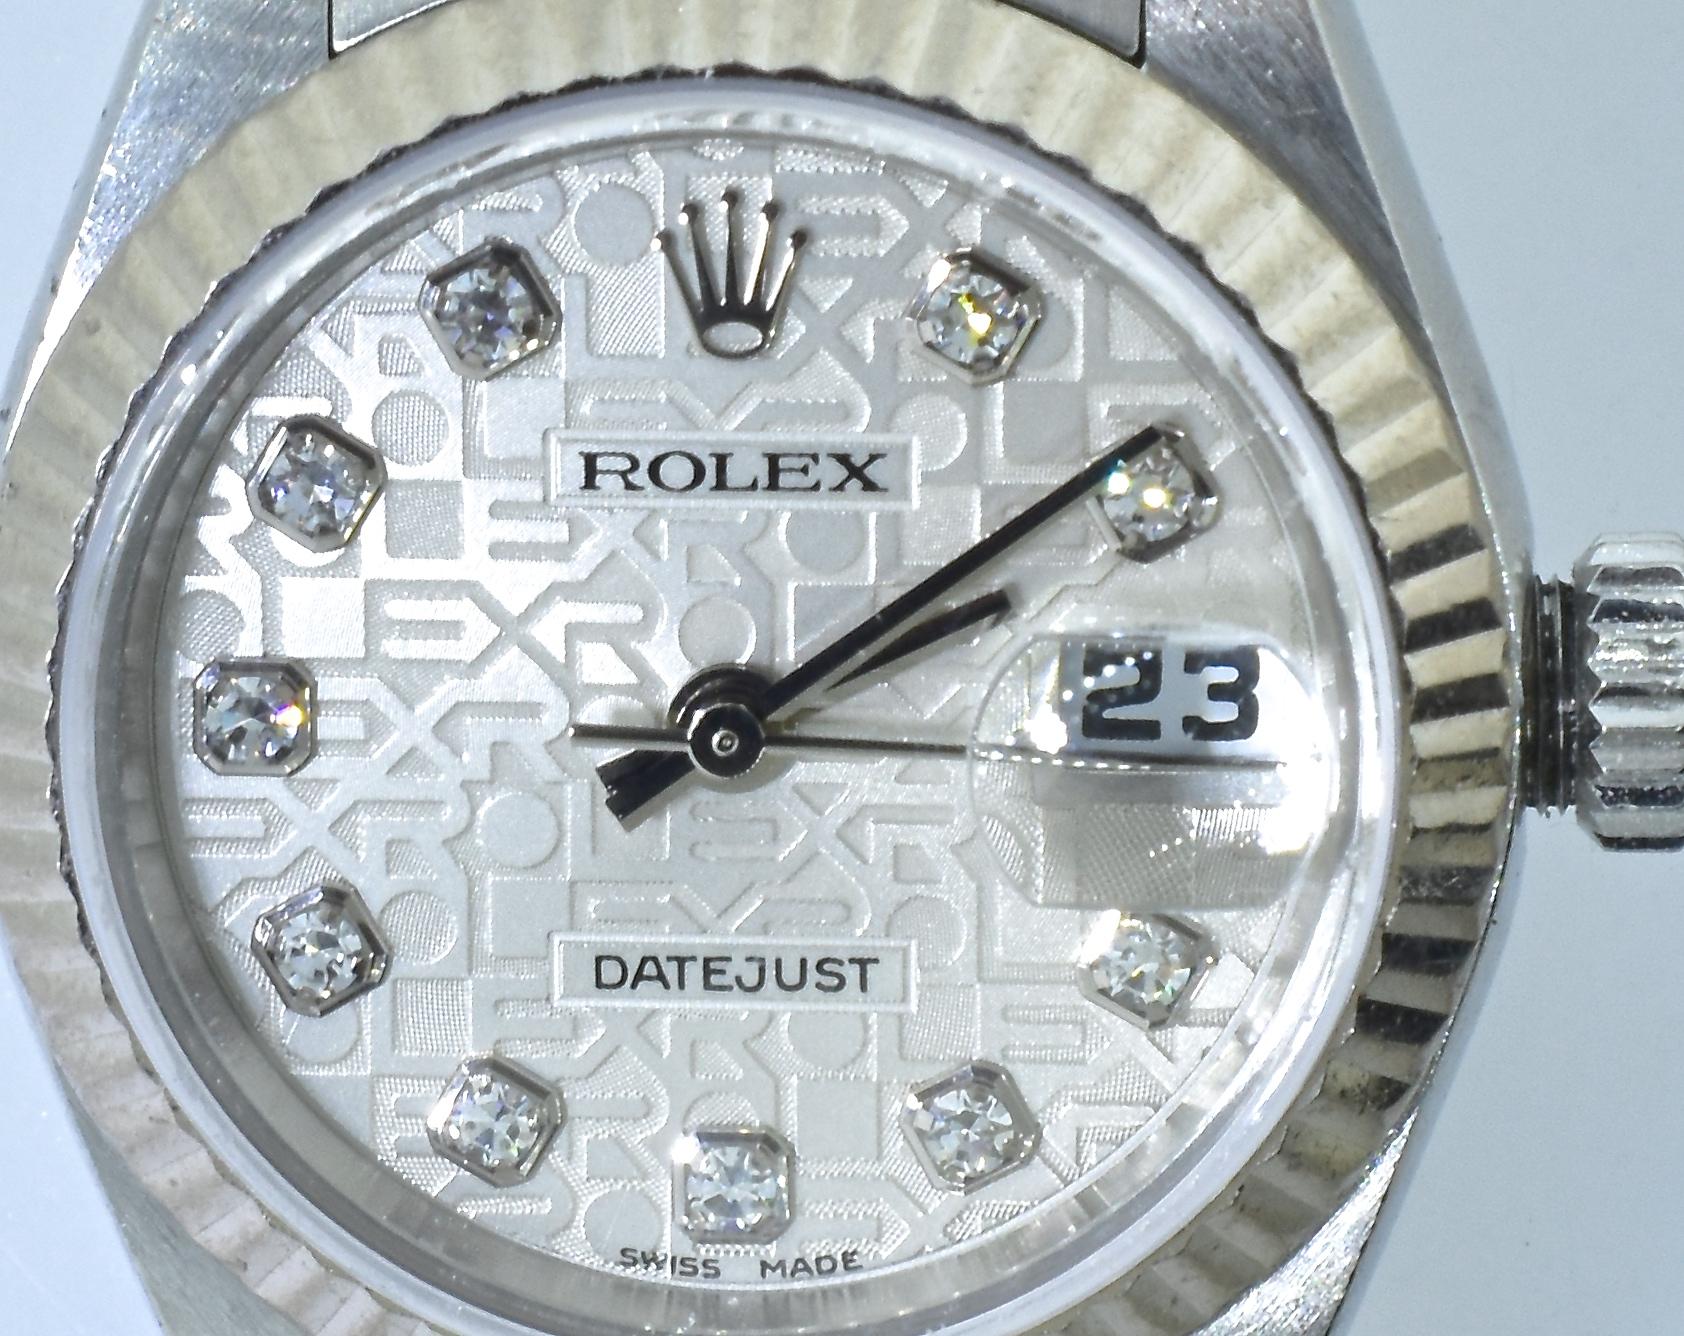 Vintage Ladies Rolex wrist watch - authentic and guaranteed, with the original fancy silver diamond jubilee dial,  date-just with sweep second hand.  Scratch resistant sapphire crystal with cyclops magnifier. In fine condition and accompanied by our